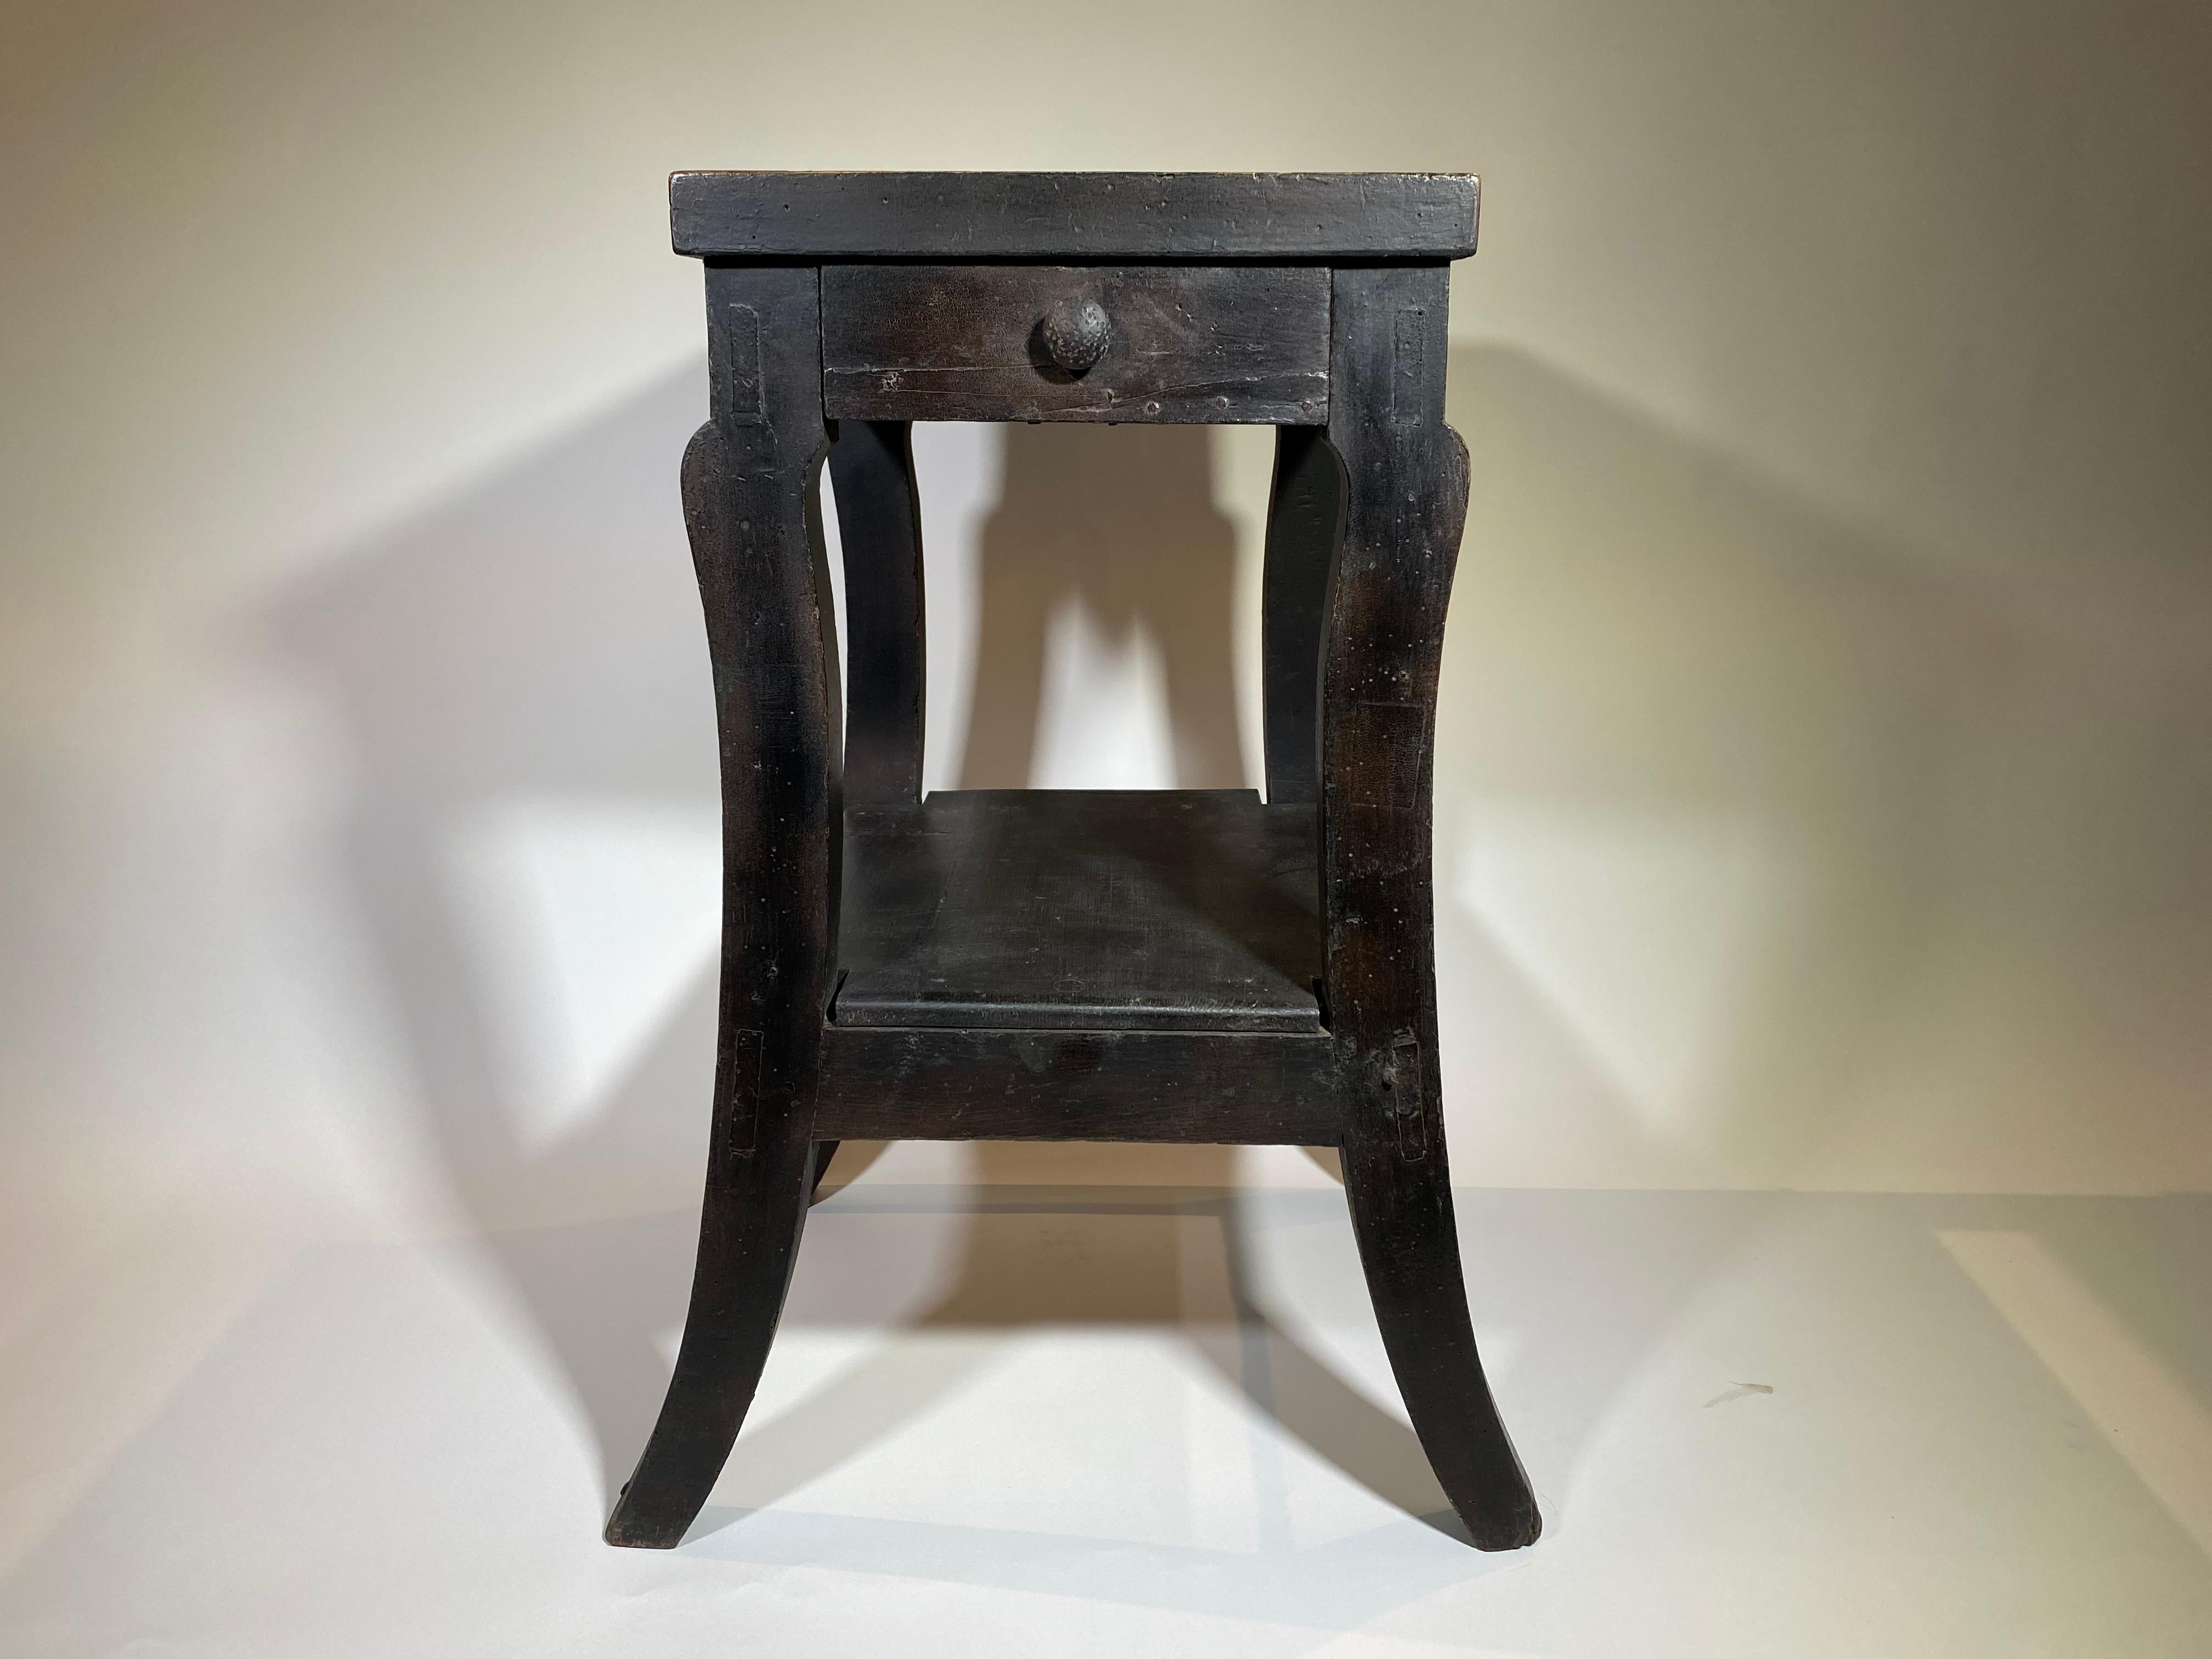 A charming mid-19th century side table from Northern Italy in painted wood. Fabulous finish and patina. A lovely shape with splayed legs, one drawer and centre shelf.